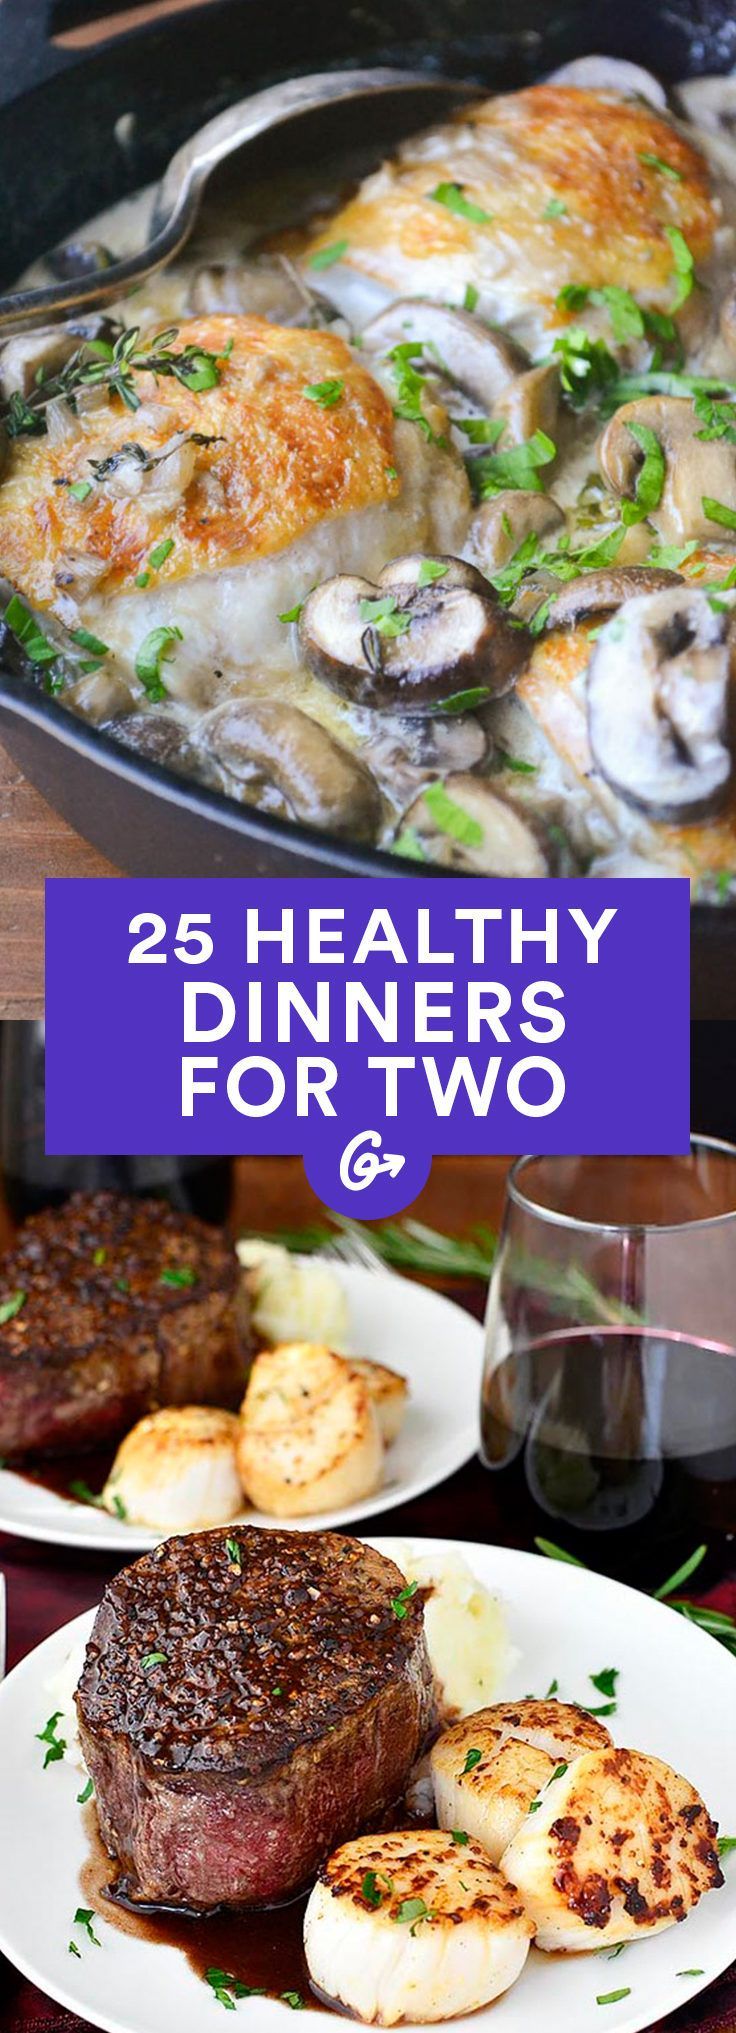 25 Healthy Dinner Recipes for Two -   19 healthy recipes For Two easy
 ideas